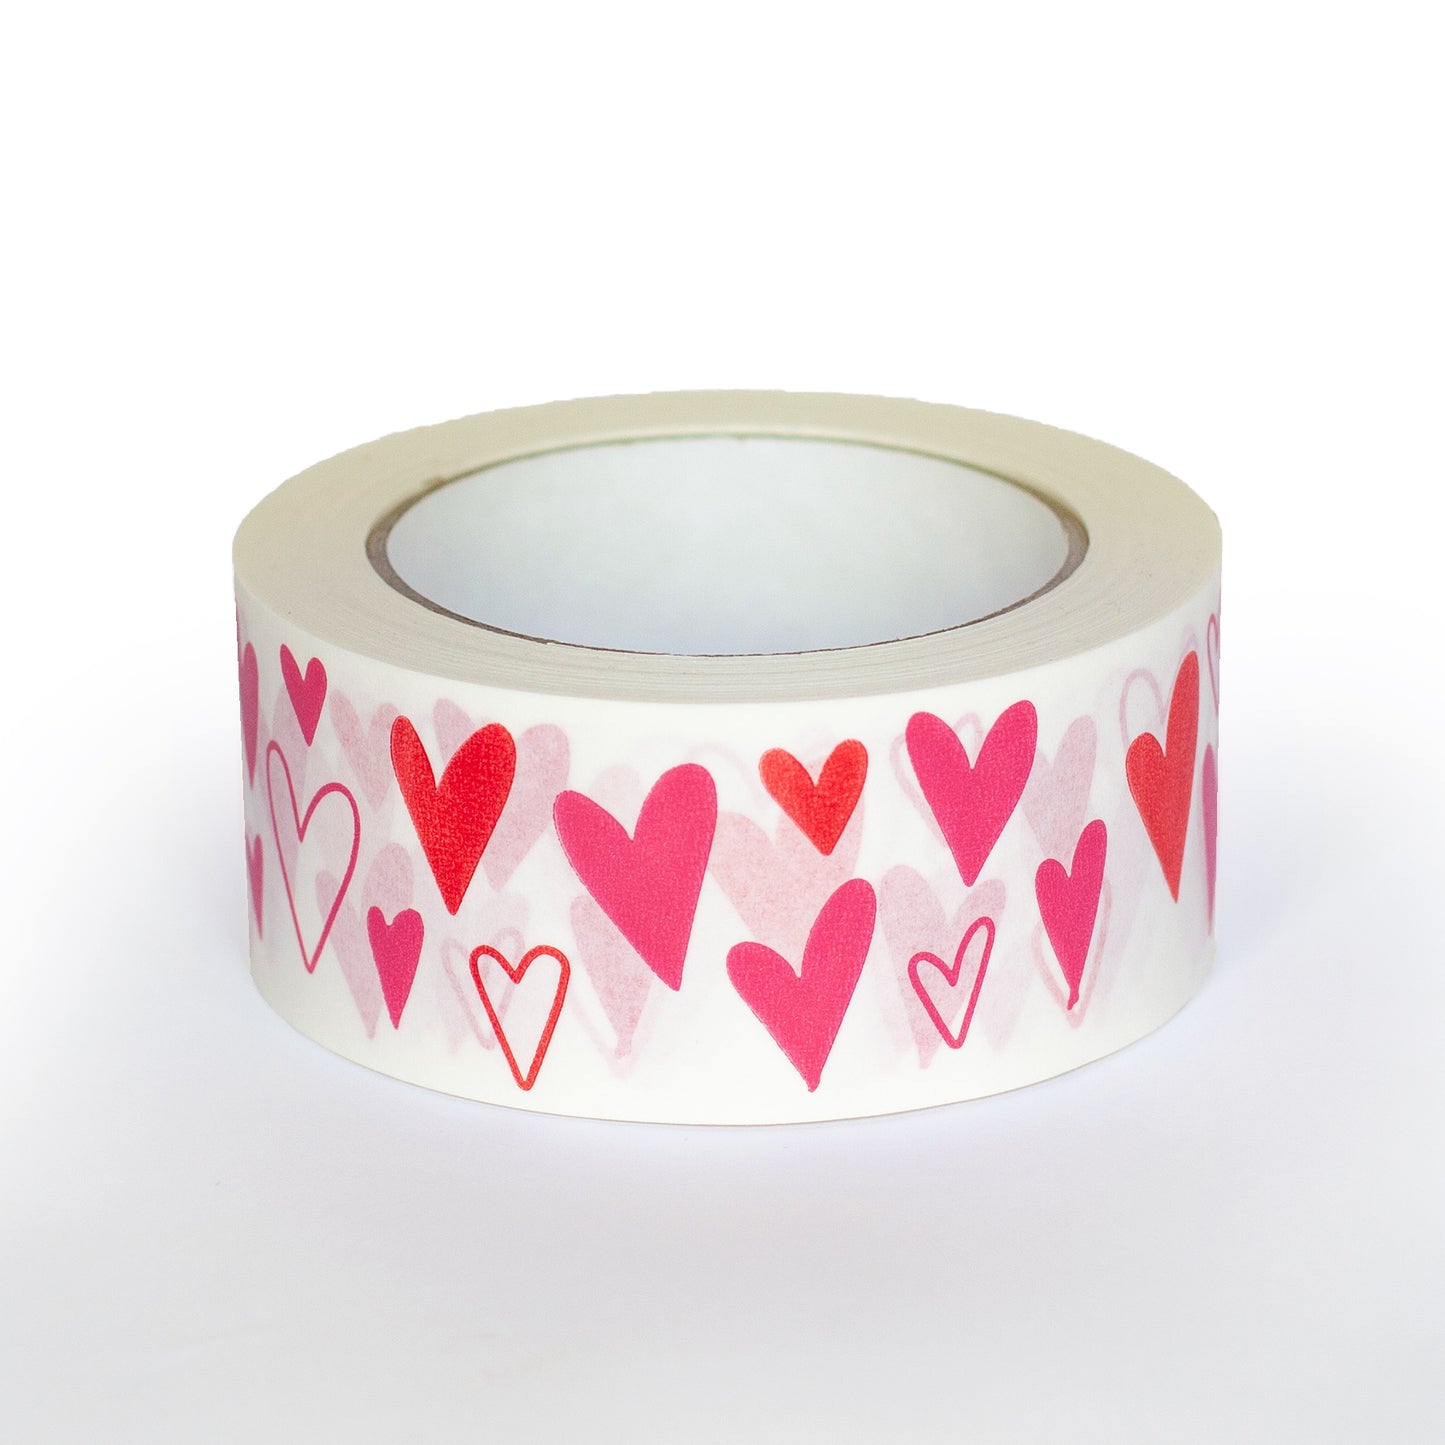 Paper decorative tape valentines heart print, 50m x 48mm. Recycled paper packing tape